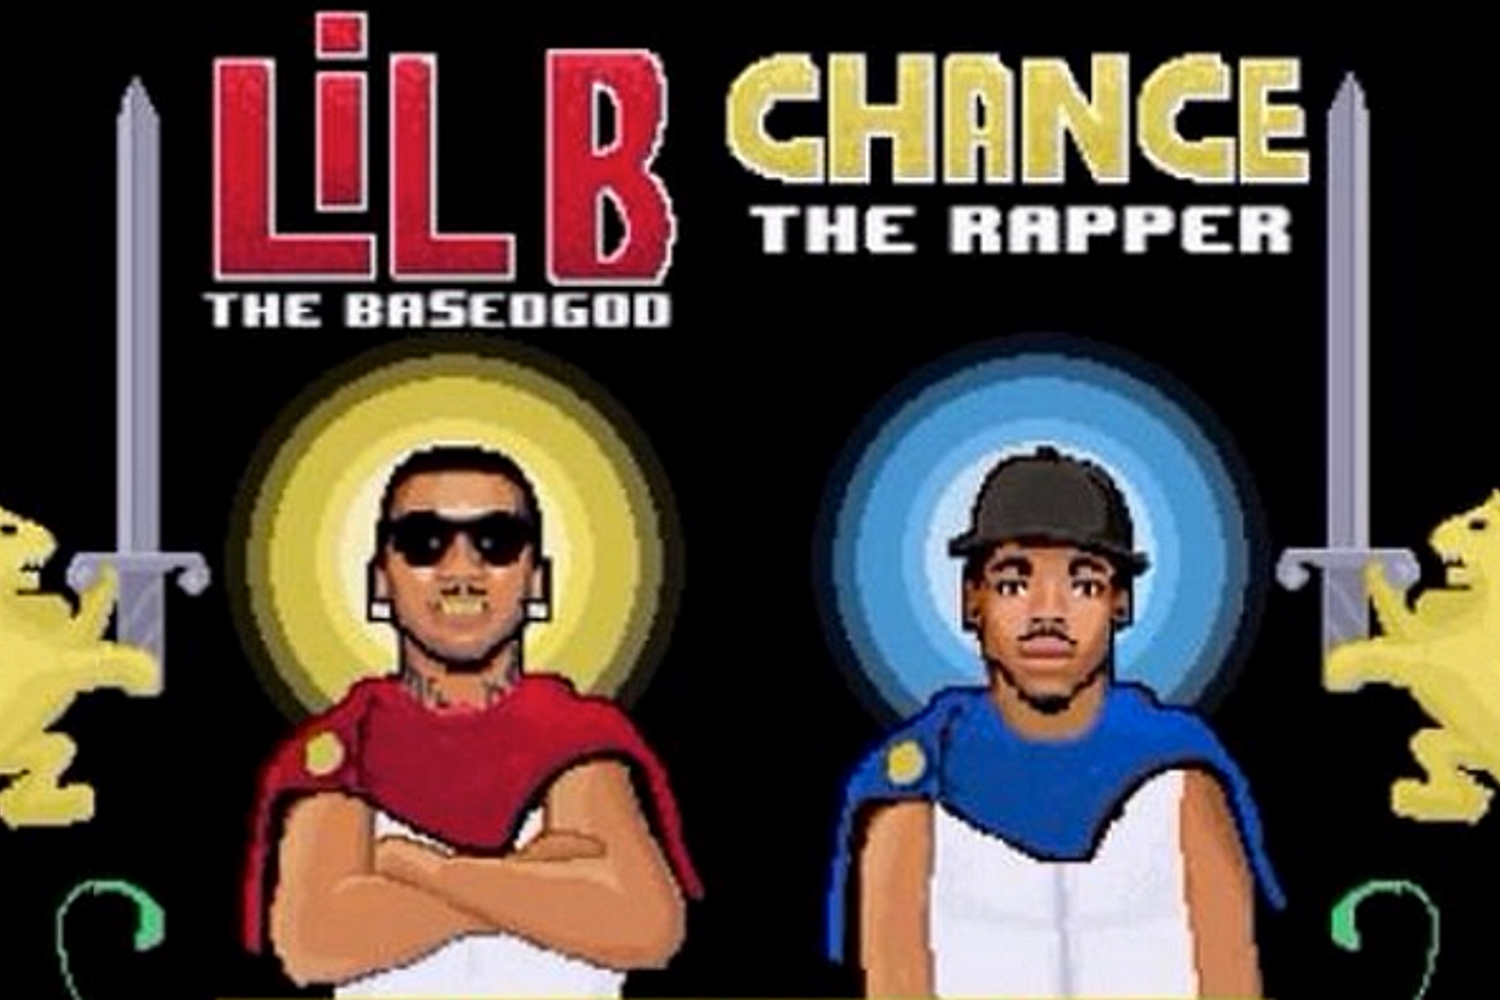 Chance The Rapper and Lil B share ‘Free Based Freestyles Mixtape’